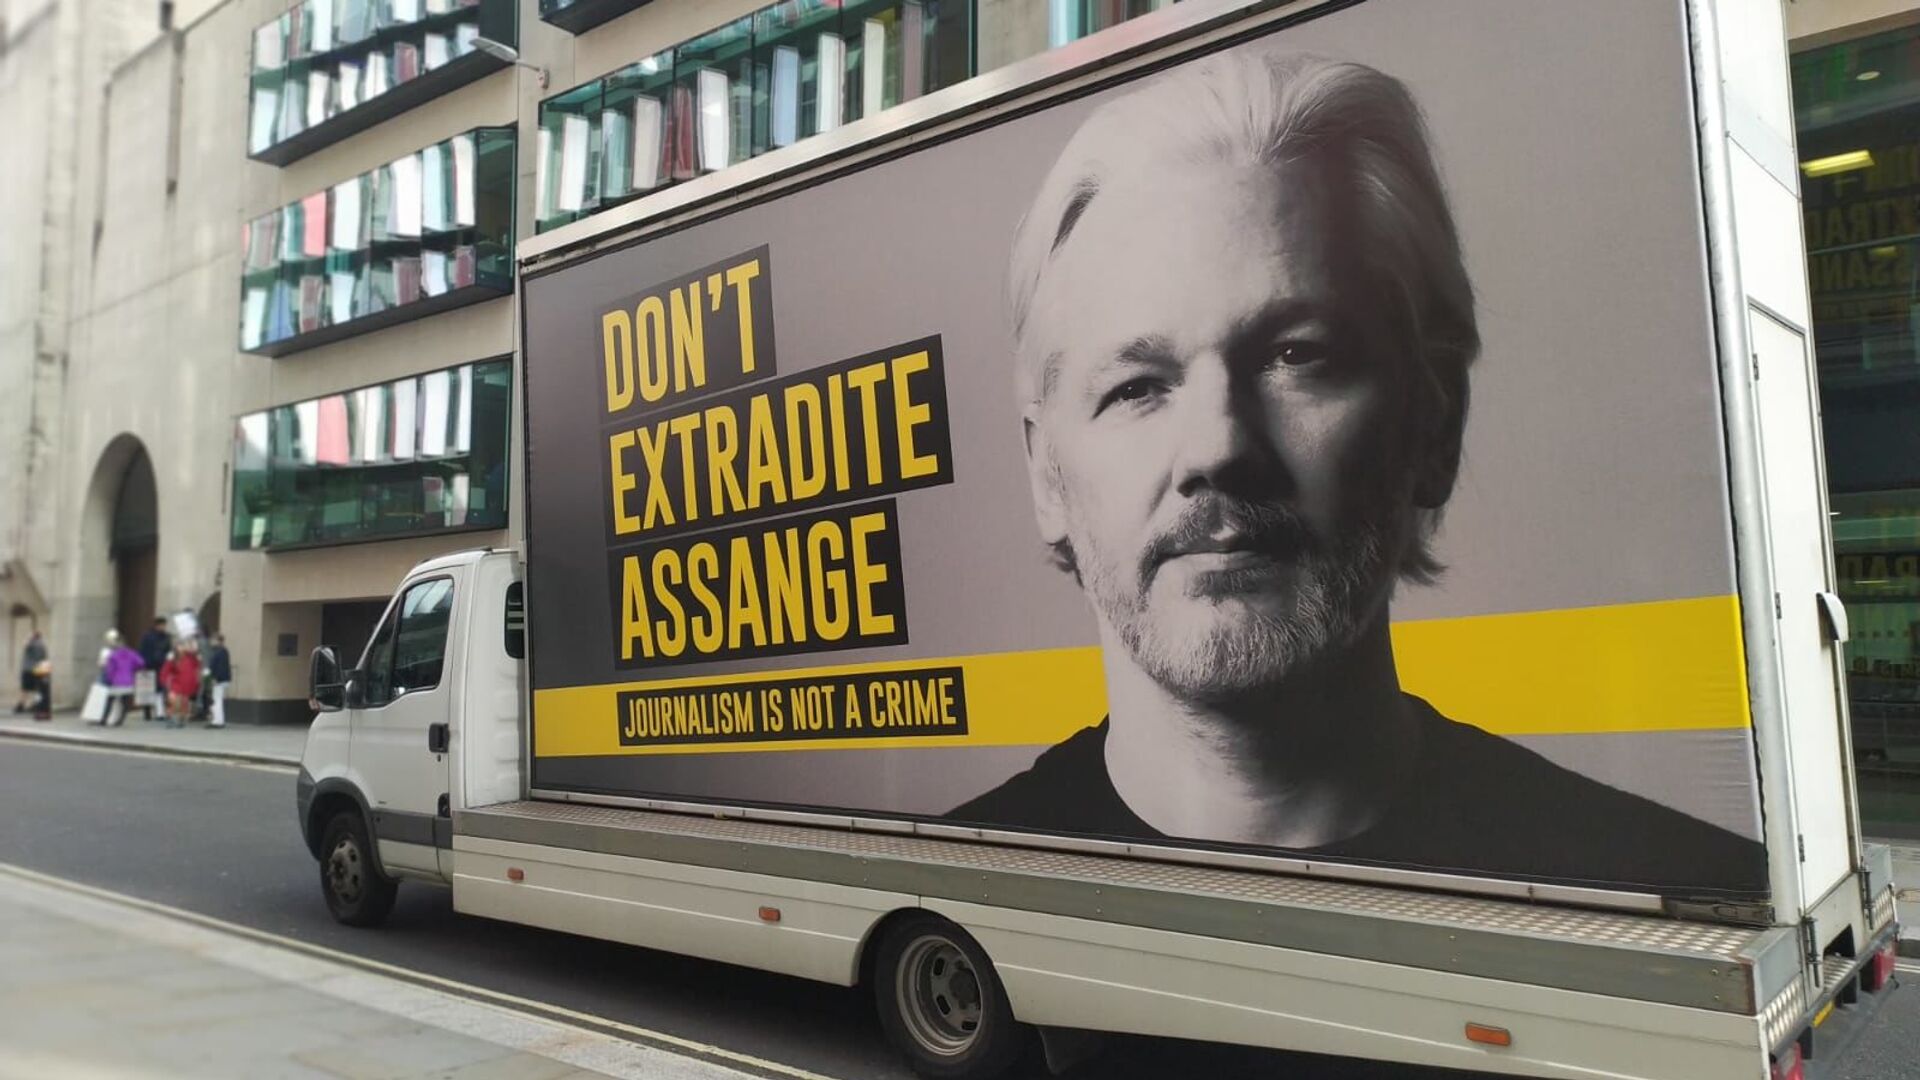 Van with banner on it saying Don't Extradite Assange - Journalism is Not a Crime passes by Old Bailey on 28 September 2020 - Sputnik International, 1920, 24.01.2022